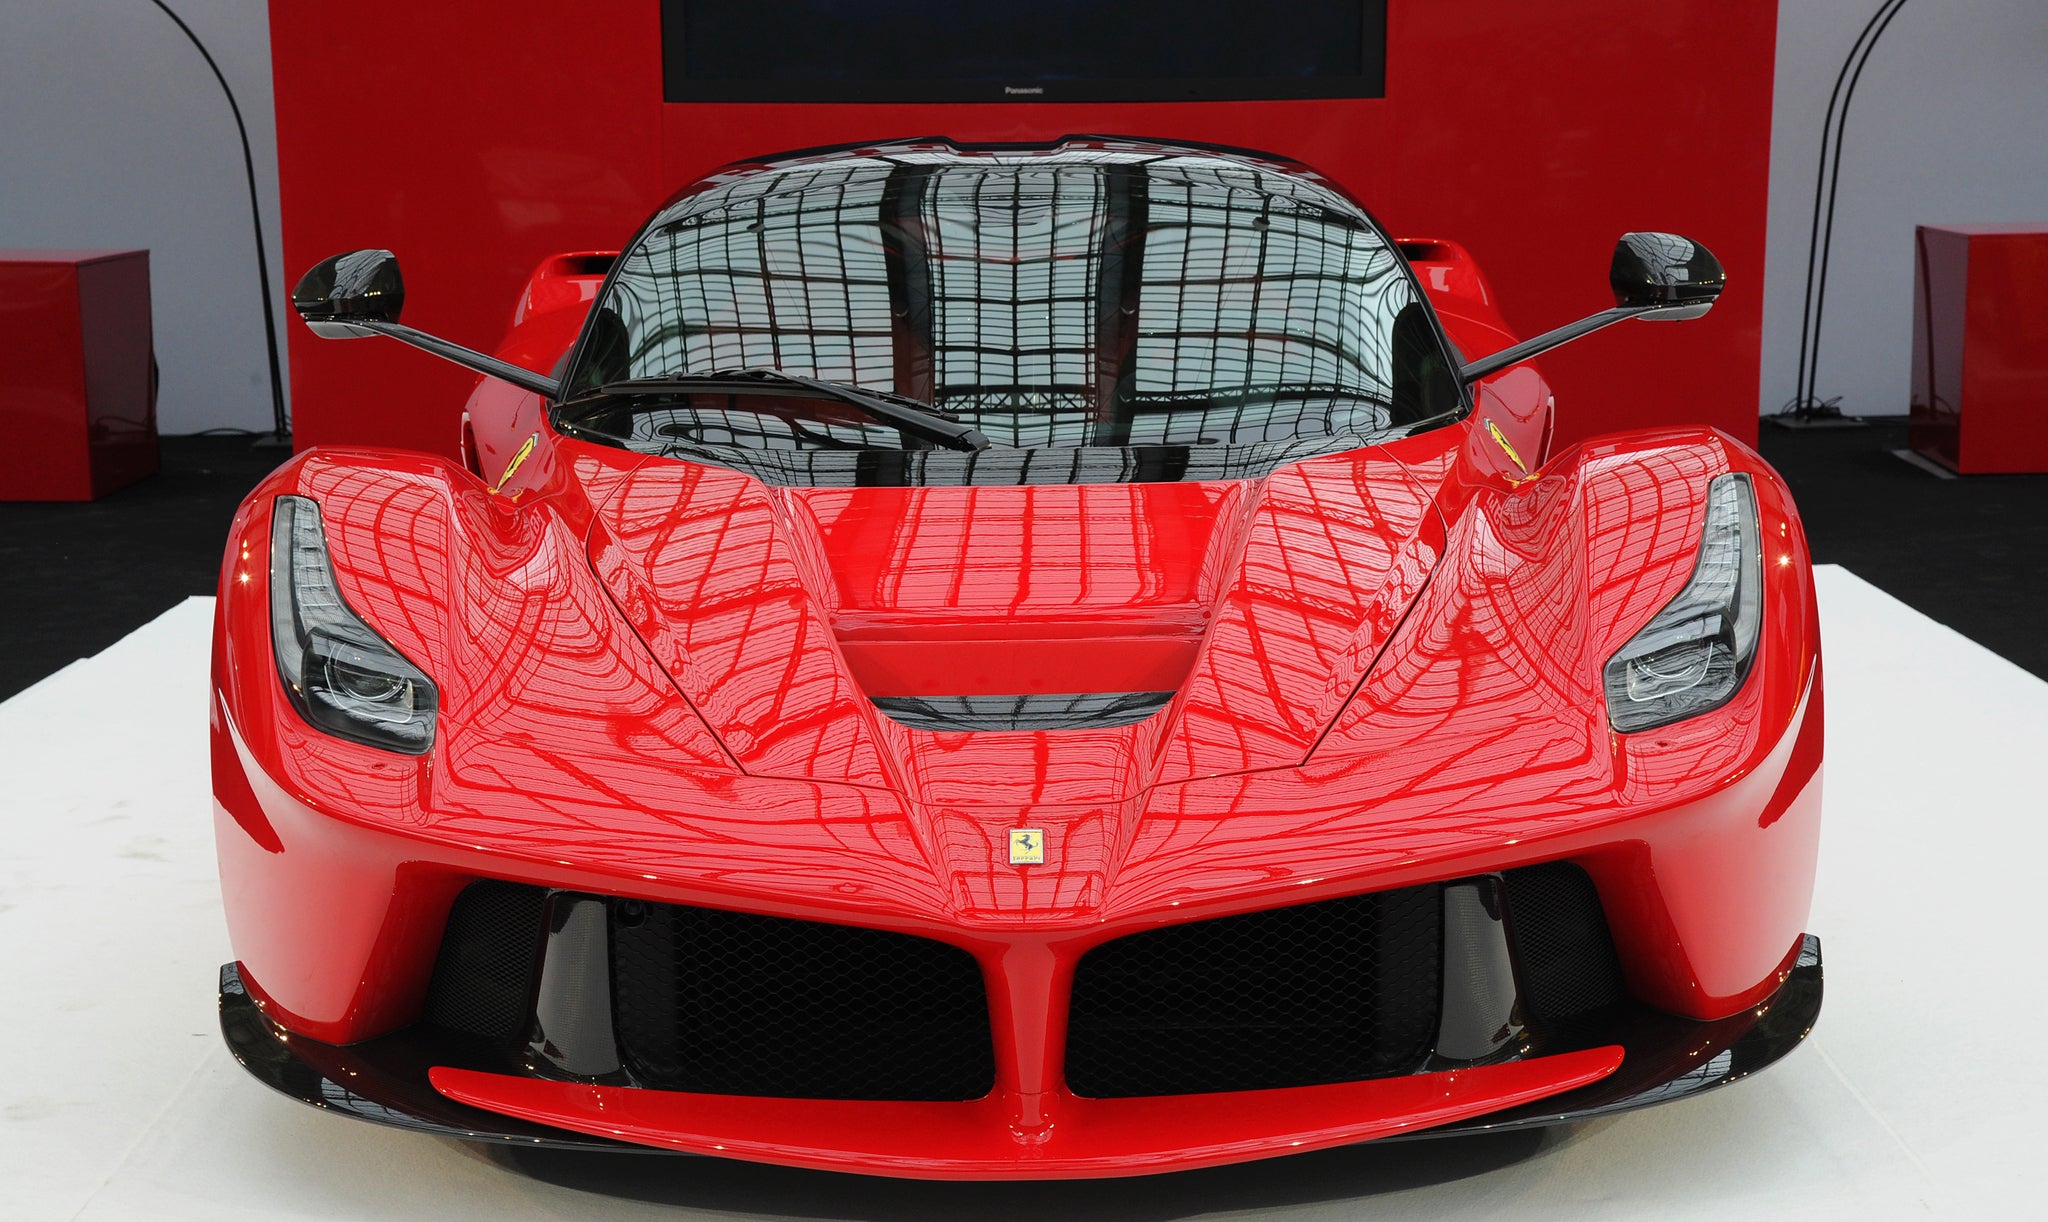 Limited edition cars such as the LaFerrari can only be bought with an invite